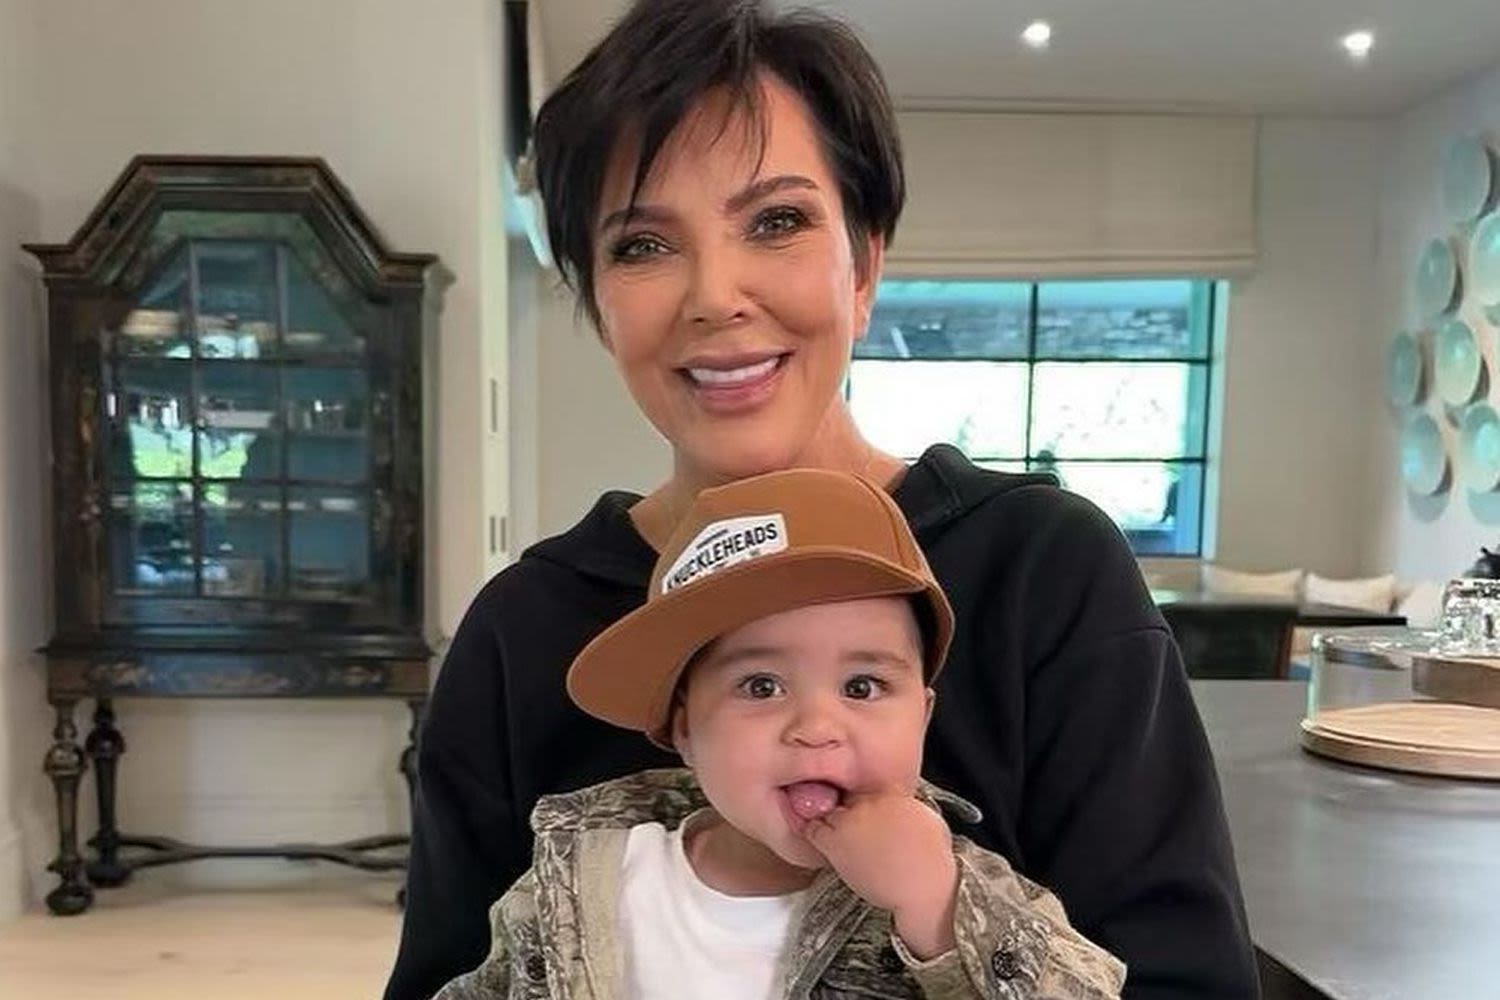 Kris Jenner Wishes Grandson Tatum a Happy Birthday as Toddler Turns 2: 'Sweetest Most Special Little Love Bug'